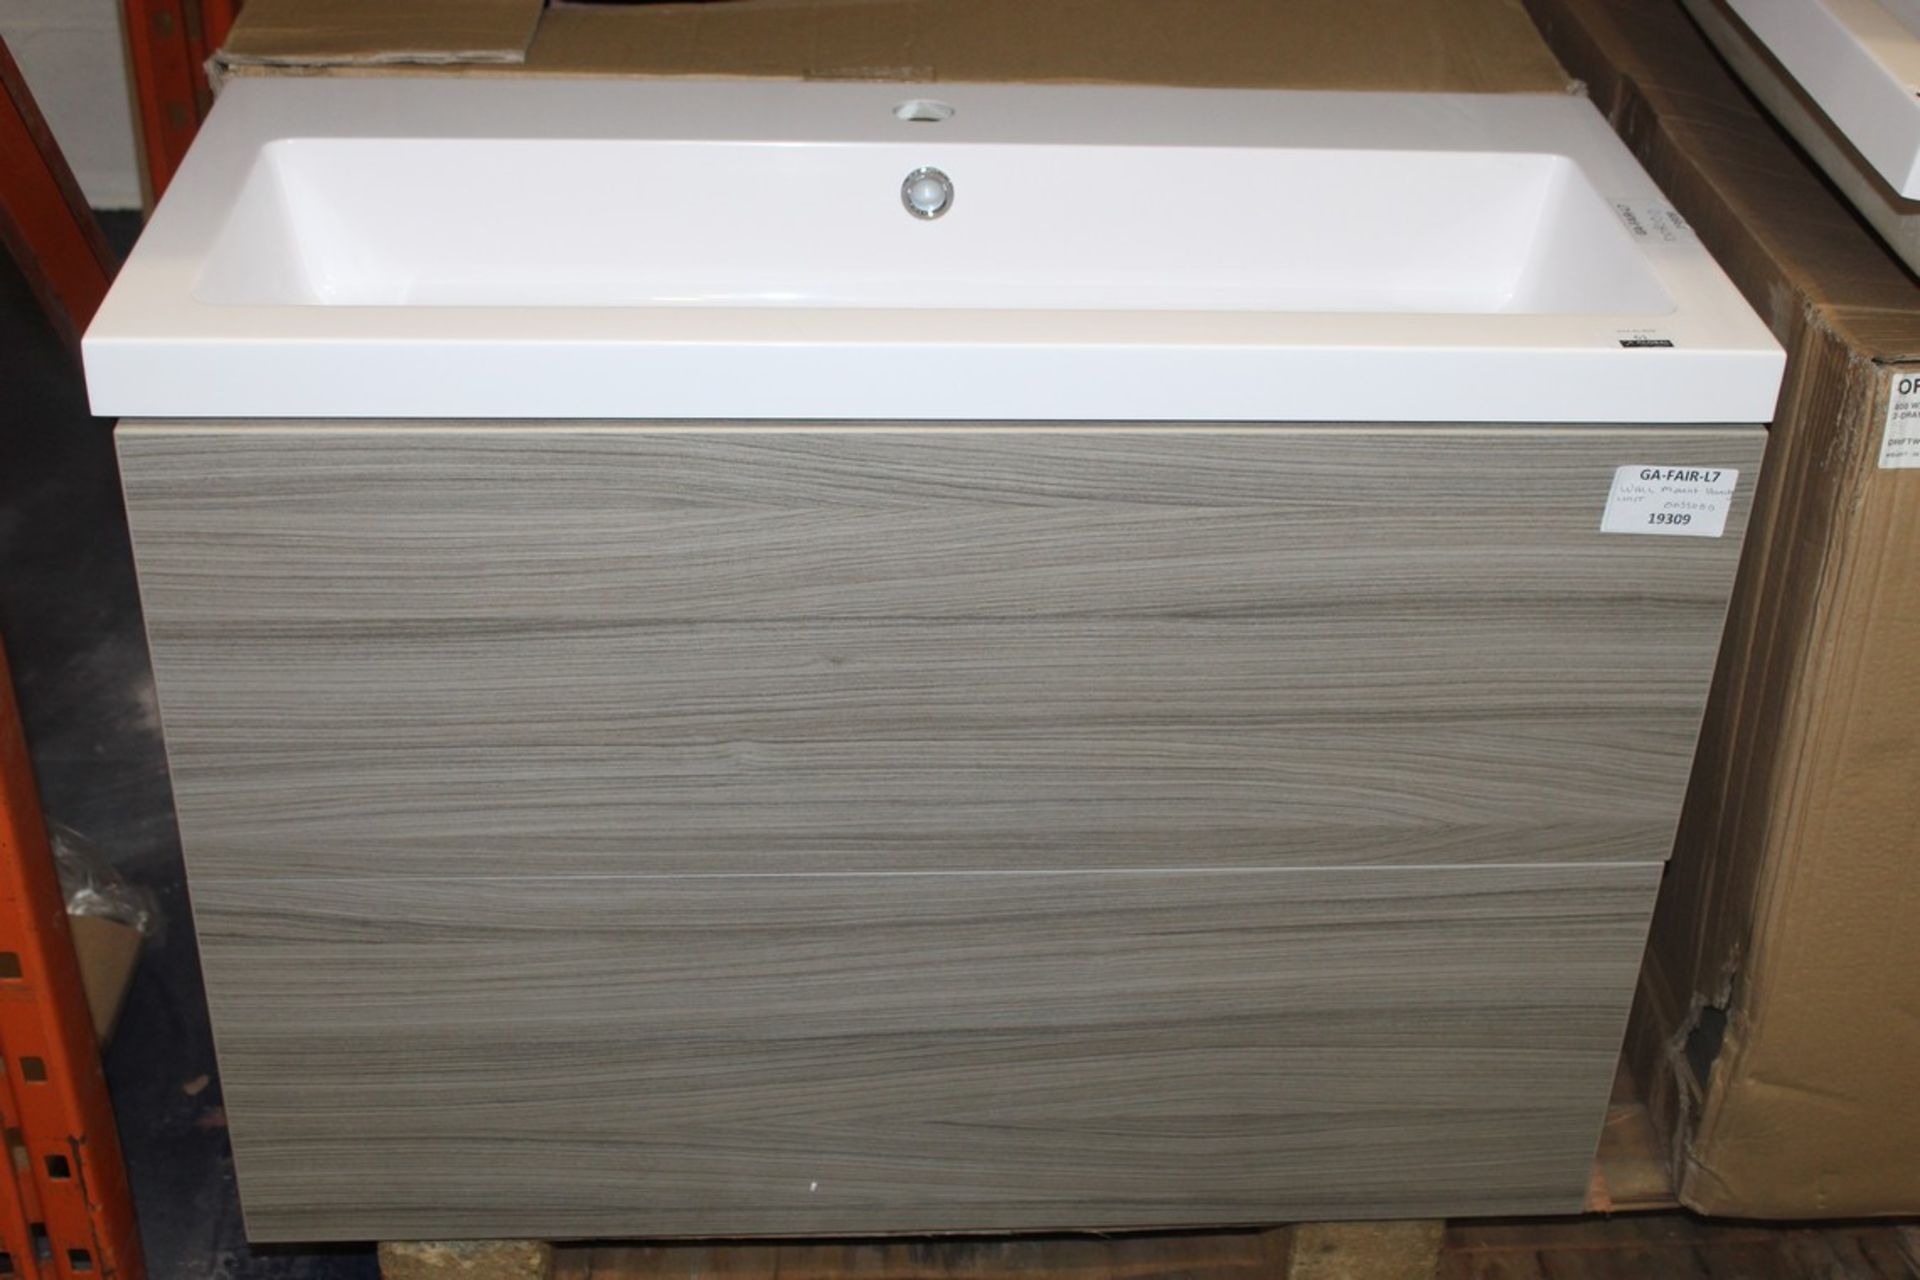 Boxed 2 Drawer Wall Mounted Vanity Unit With Basin RRP £350 (19309) (Pictures Are For Illustration